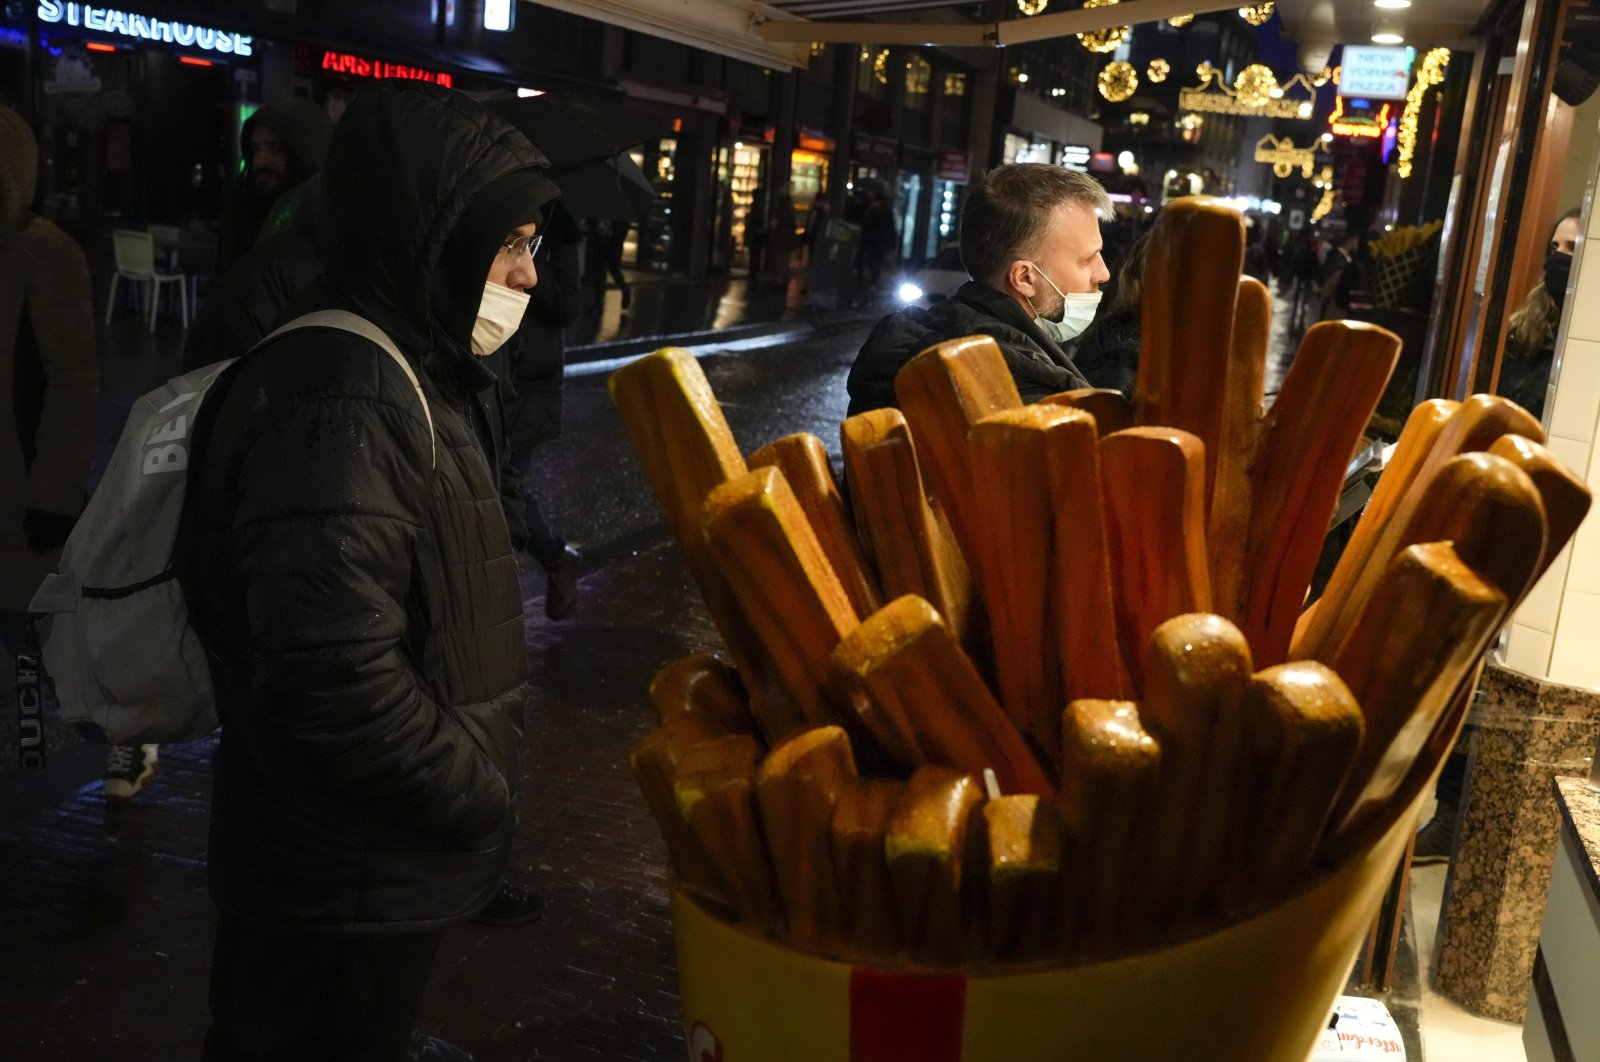 In this file photo, people can be seen queuing to order take-out french fries, Nov. 29, 2021. (AP Photo)